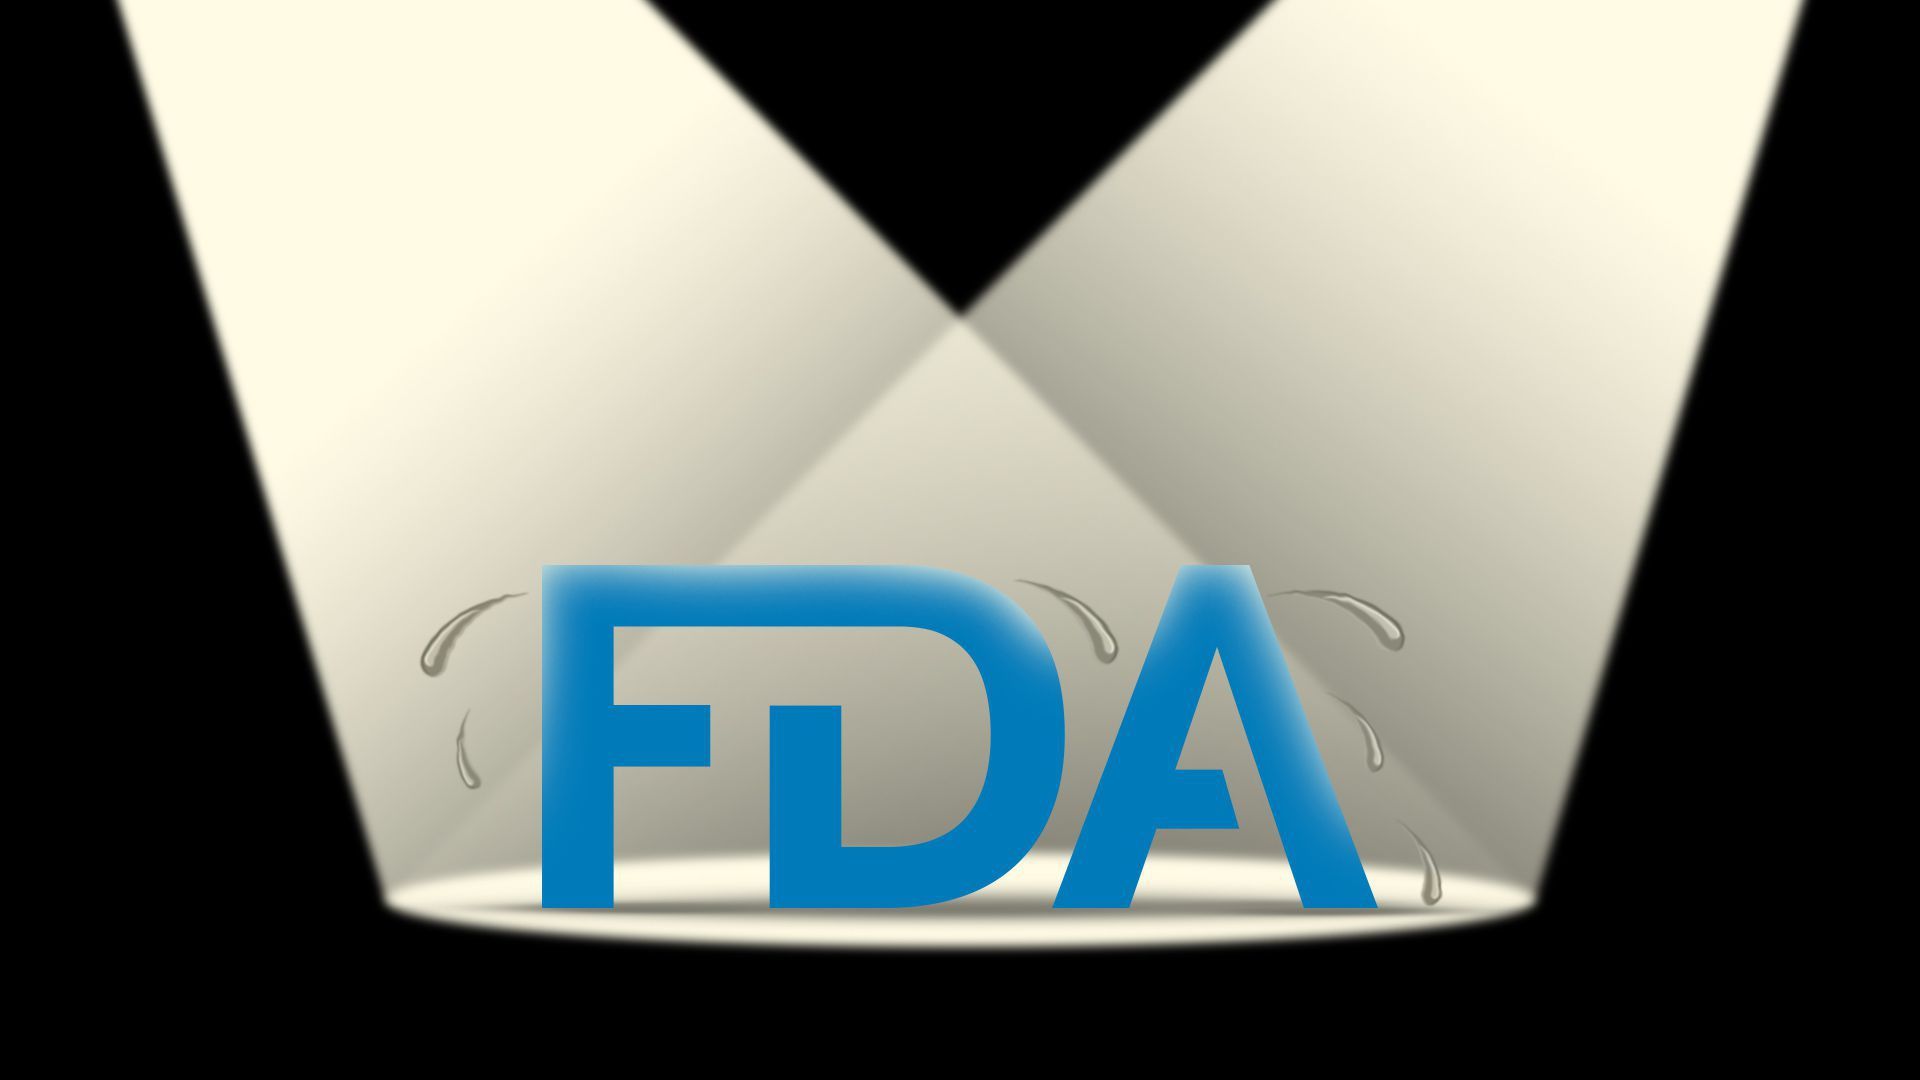 FDA's logo under a harsh spotlight appears to be sweating.